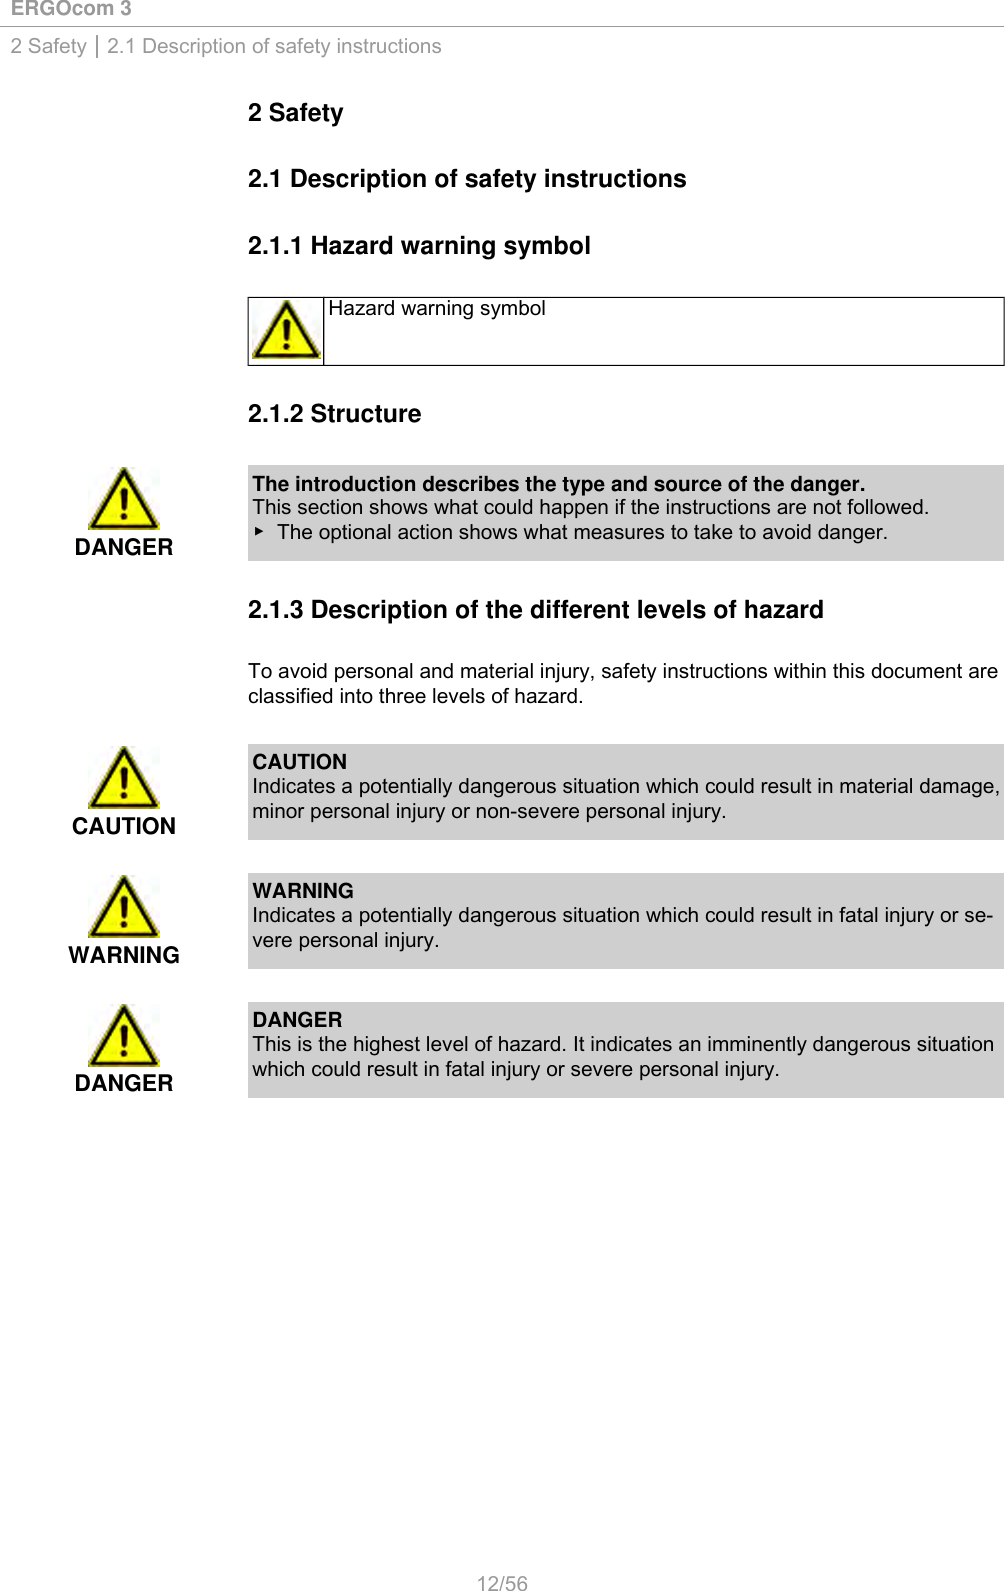 ERGOcom 32 Safety | 2.1 Description of safety instructions2 Safety2.1 Description of safety instructions2.1.1 Hazard warning symbolHazard warning symbol2.1.2 StructureDANGERThe introduction describes the type and source of the danger.This section shows what could happen if the instructions are not followed.▶ The optional action shows what measures to take to avoid danger.2.1.3 Description of the different levels of hazardTo avoid personal and material injury, safety instructions within this document areclassified into three levels of hazard.CAUTIONCAUTIONIndicates a potentially dangerous situation which could result in material damage,minor personal injury or non-severe personal injury.WARNINGWARNINGIndicates a potentially dangerous situation which could result in fatal injury or se-vere personal injury.DANGERDANGERThis is the highest level of hazard. It indicates an imminently dangerous situationwhich could result in fatal injury or severe personal injury.12/56